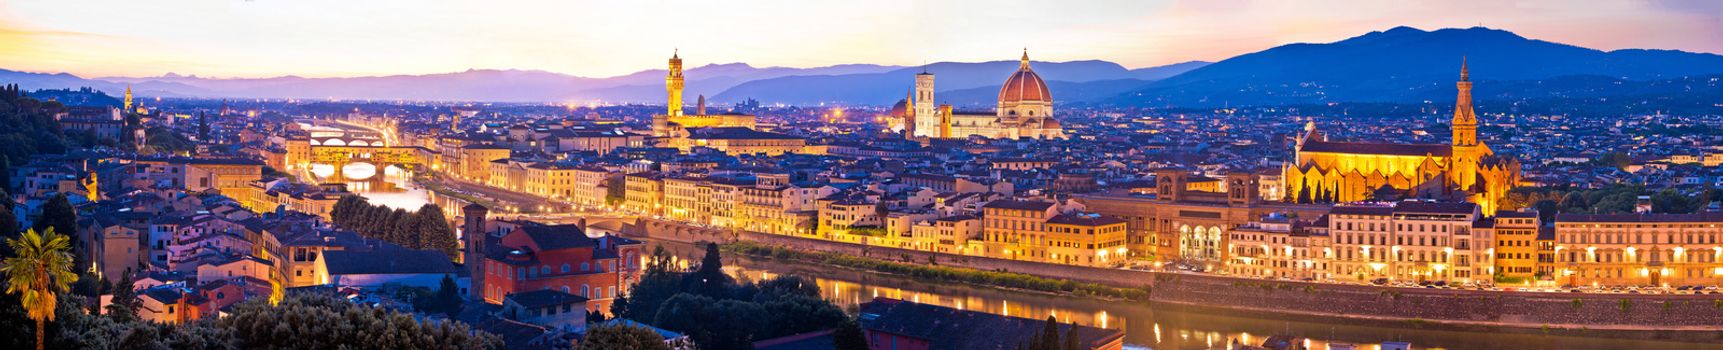 Florence cityscape panoramic evening view, Tuscany region of Italy